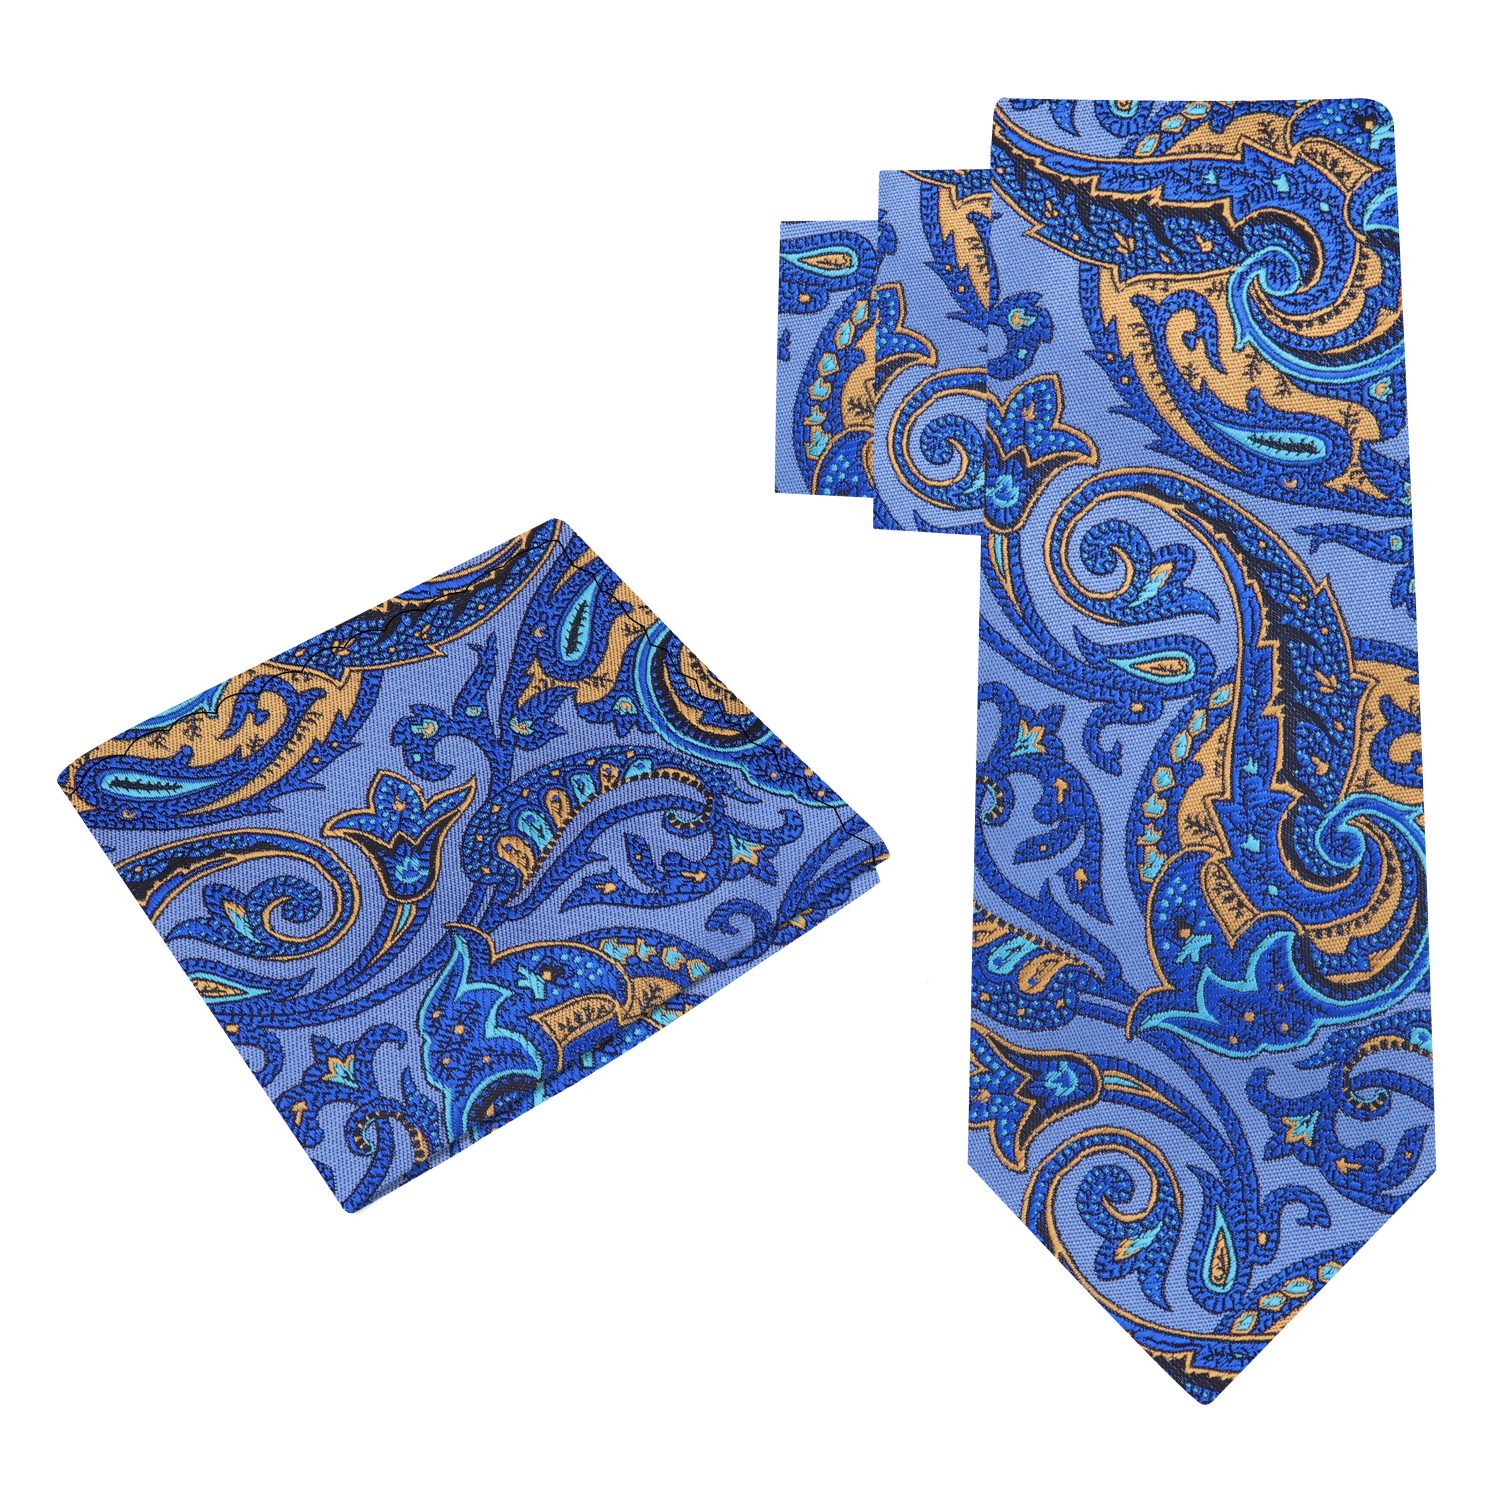 Alt View: Blue, Yellow Paisley Tie and Pocket Square